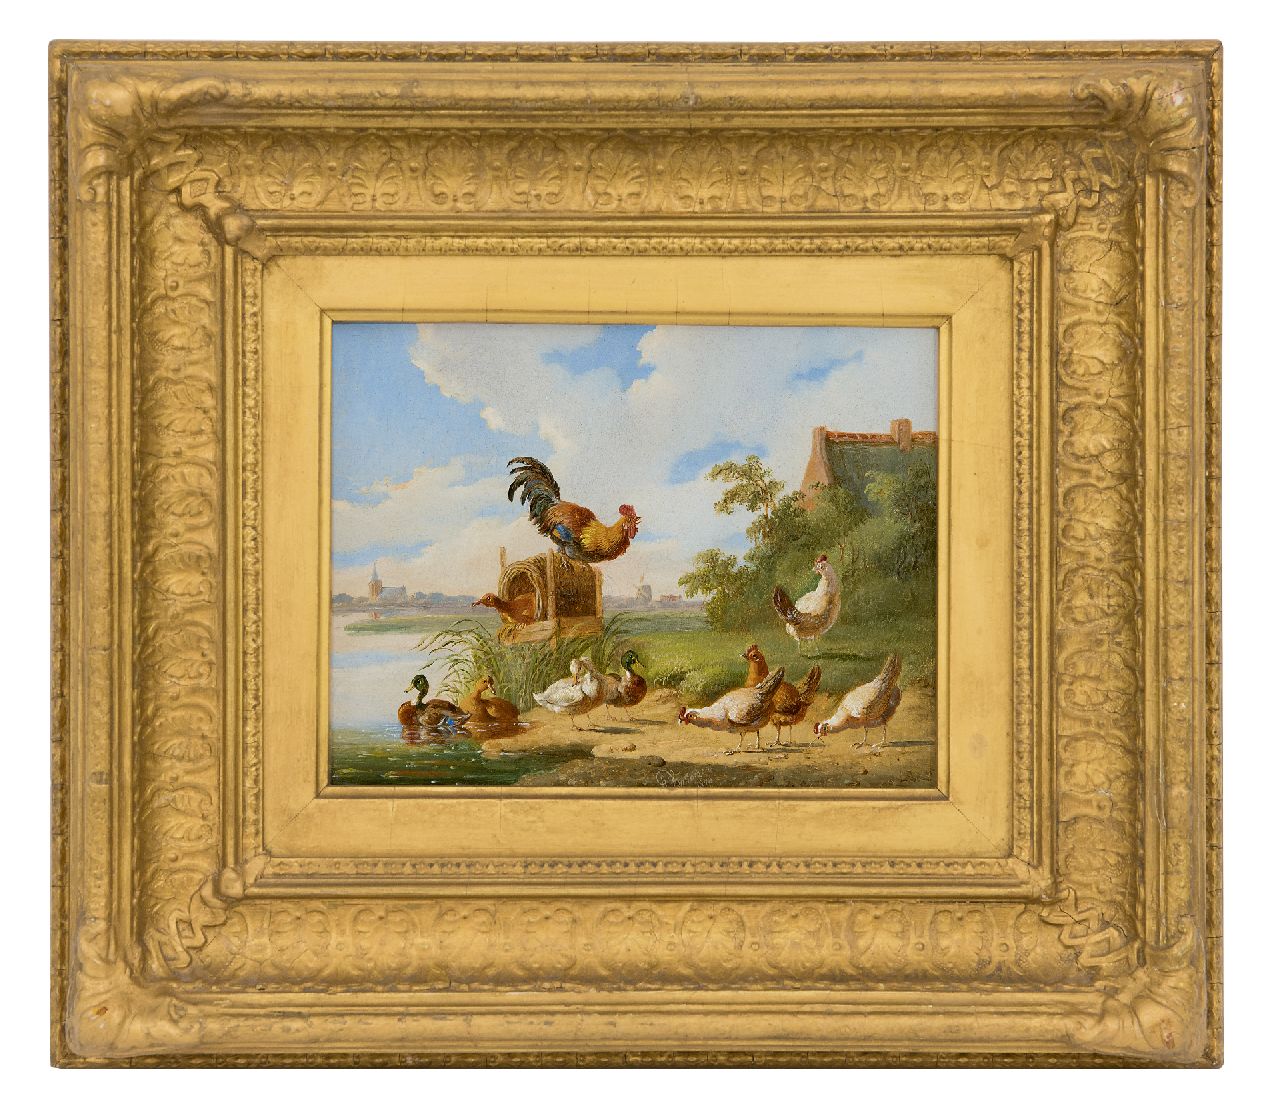 Verhoesen A.  | Albertus Verhoesen, A cock, chicken and ducks on a riverbank, oil on panel 14.7 x 18.7 cm, signed l.c. and dated 1870